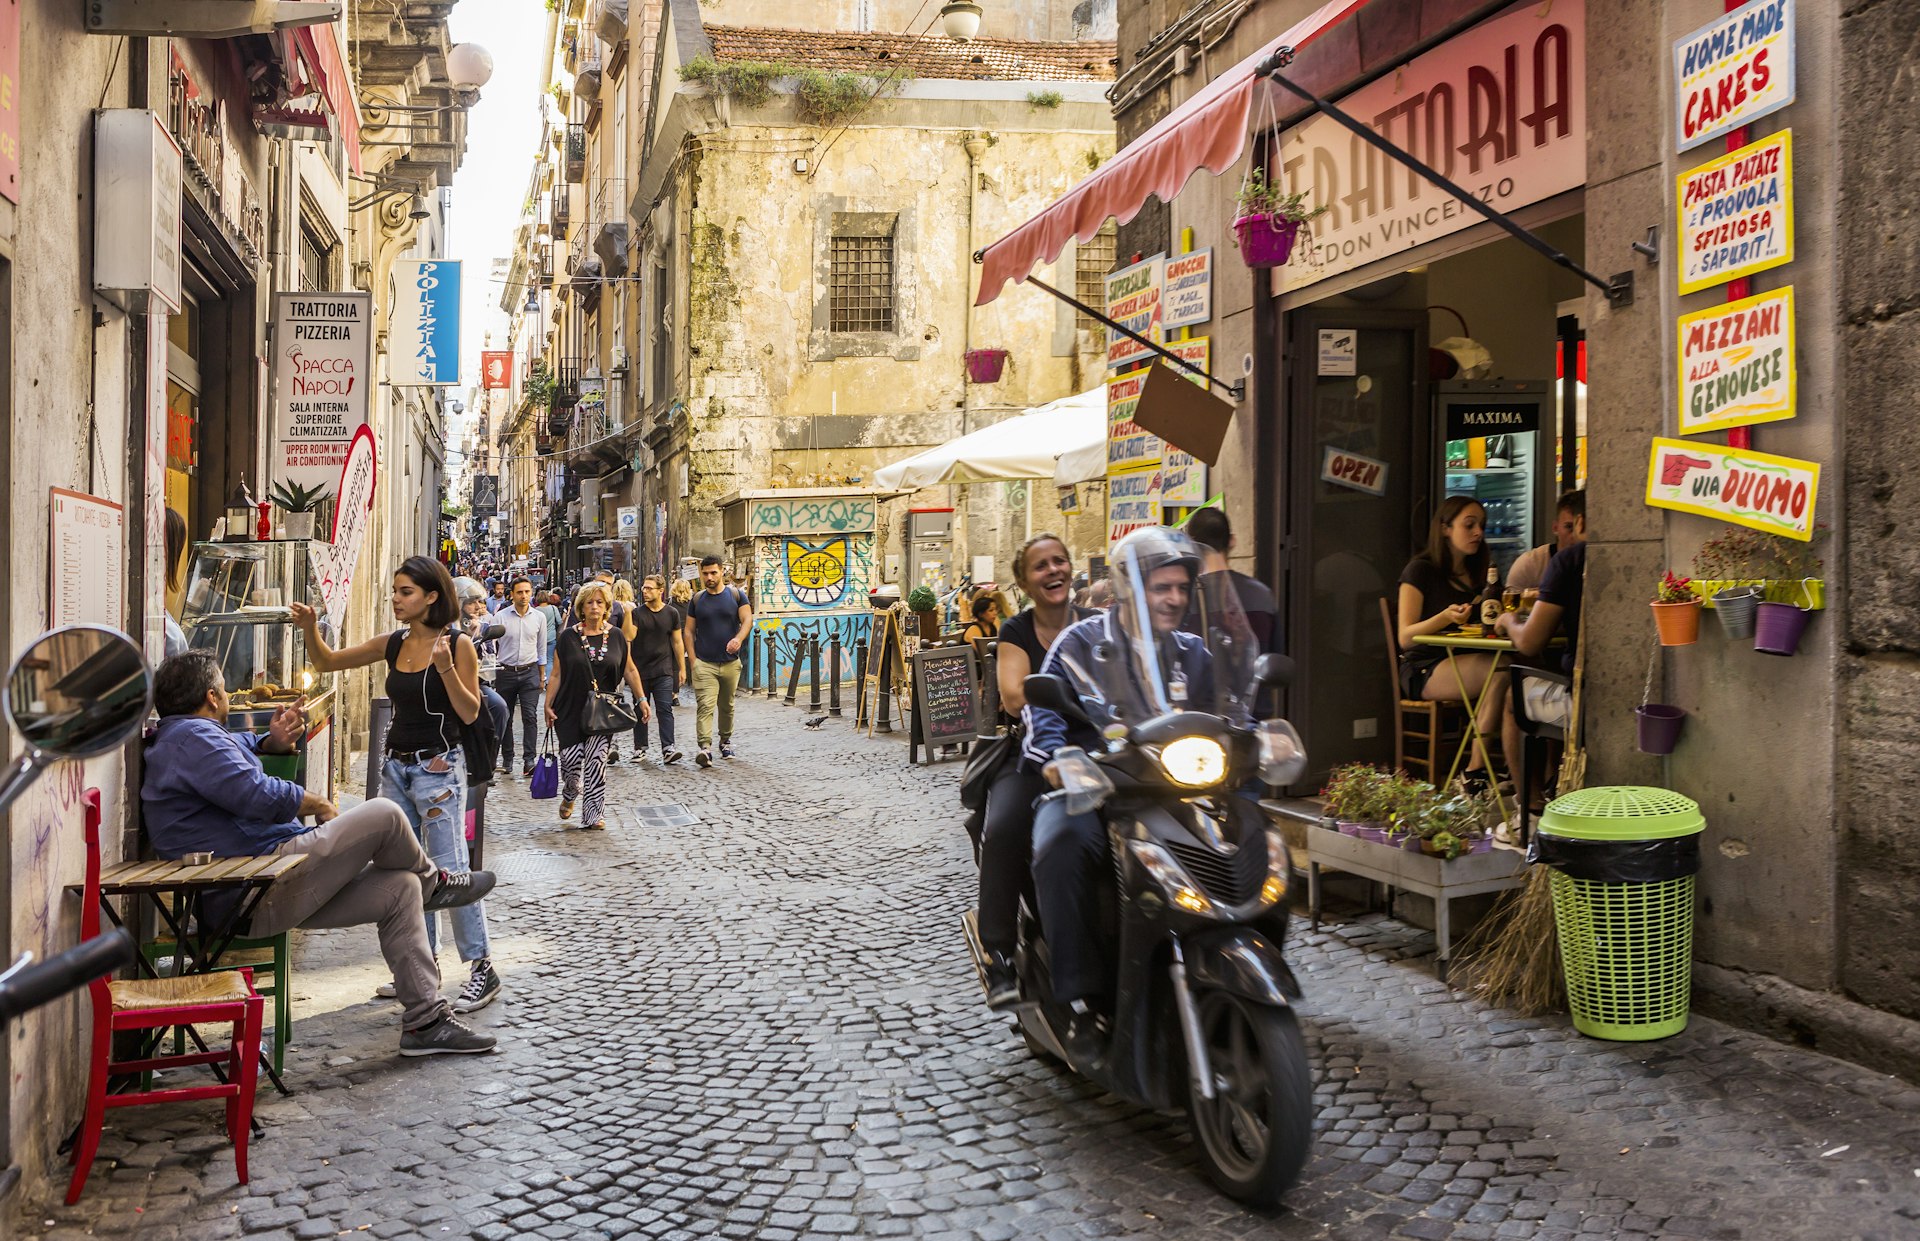 A scooter drives by shoppers on narrow Spaccanapoli, Naples, Campania, Italy